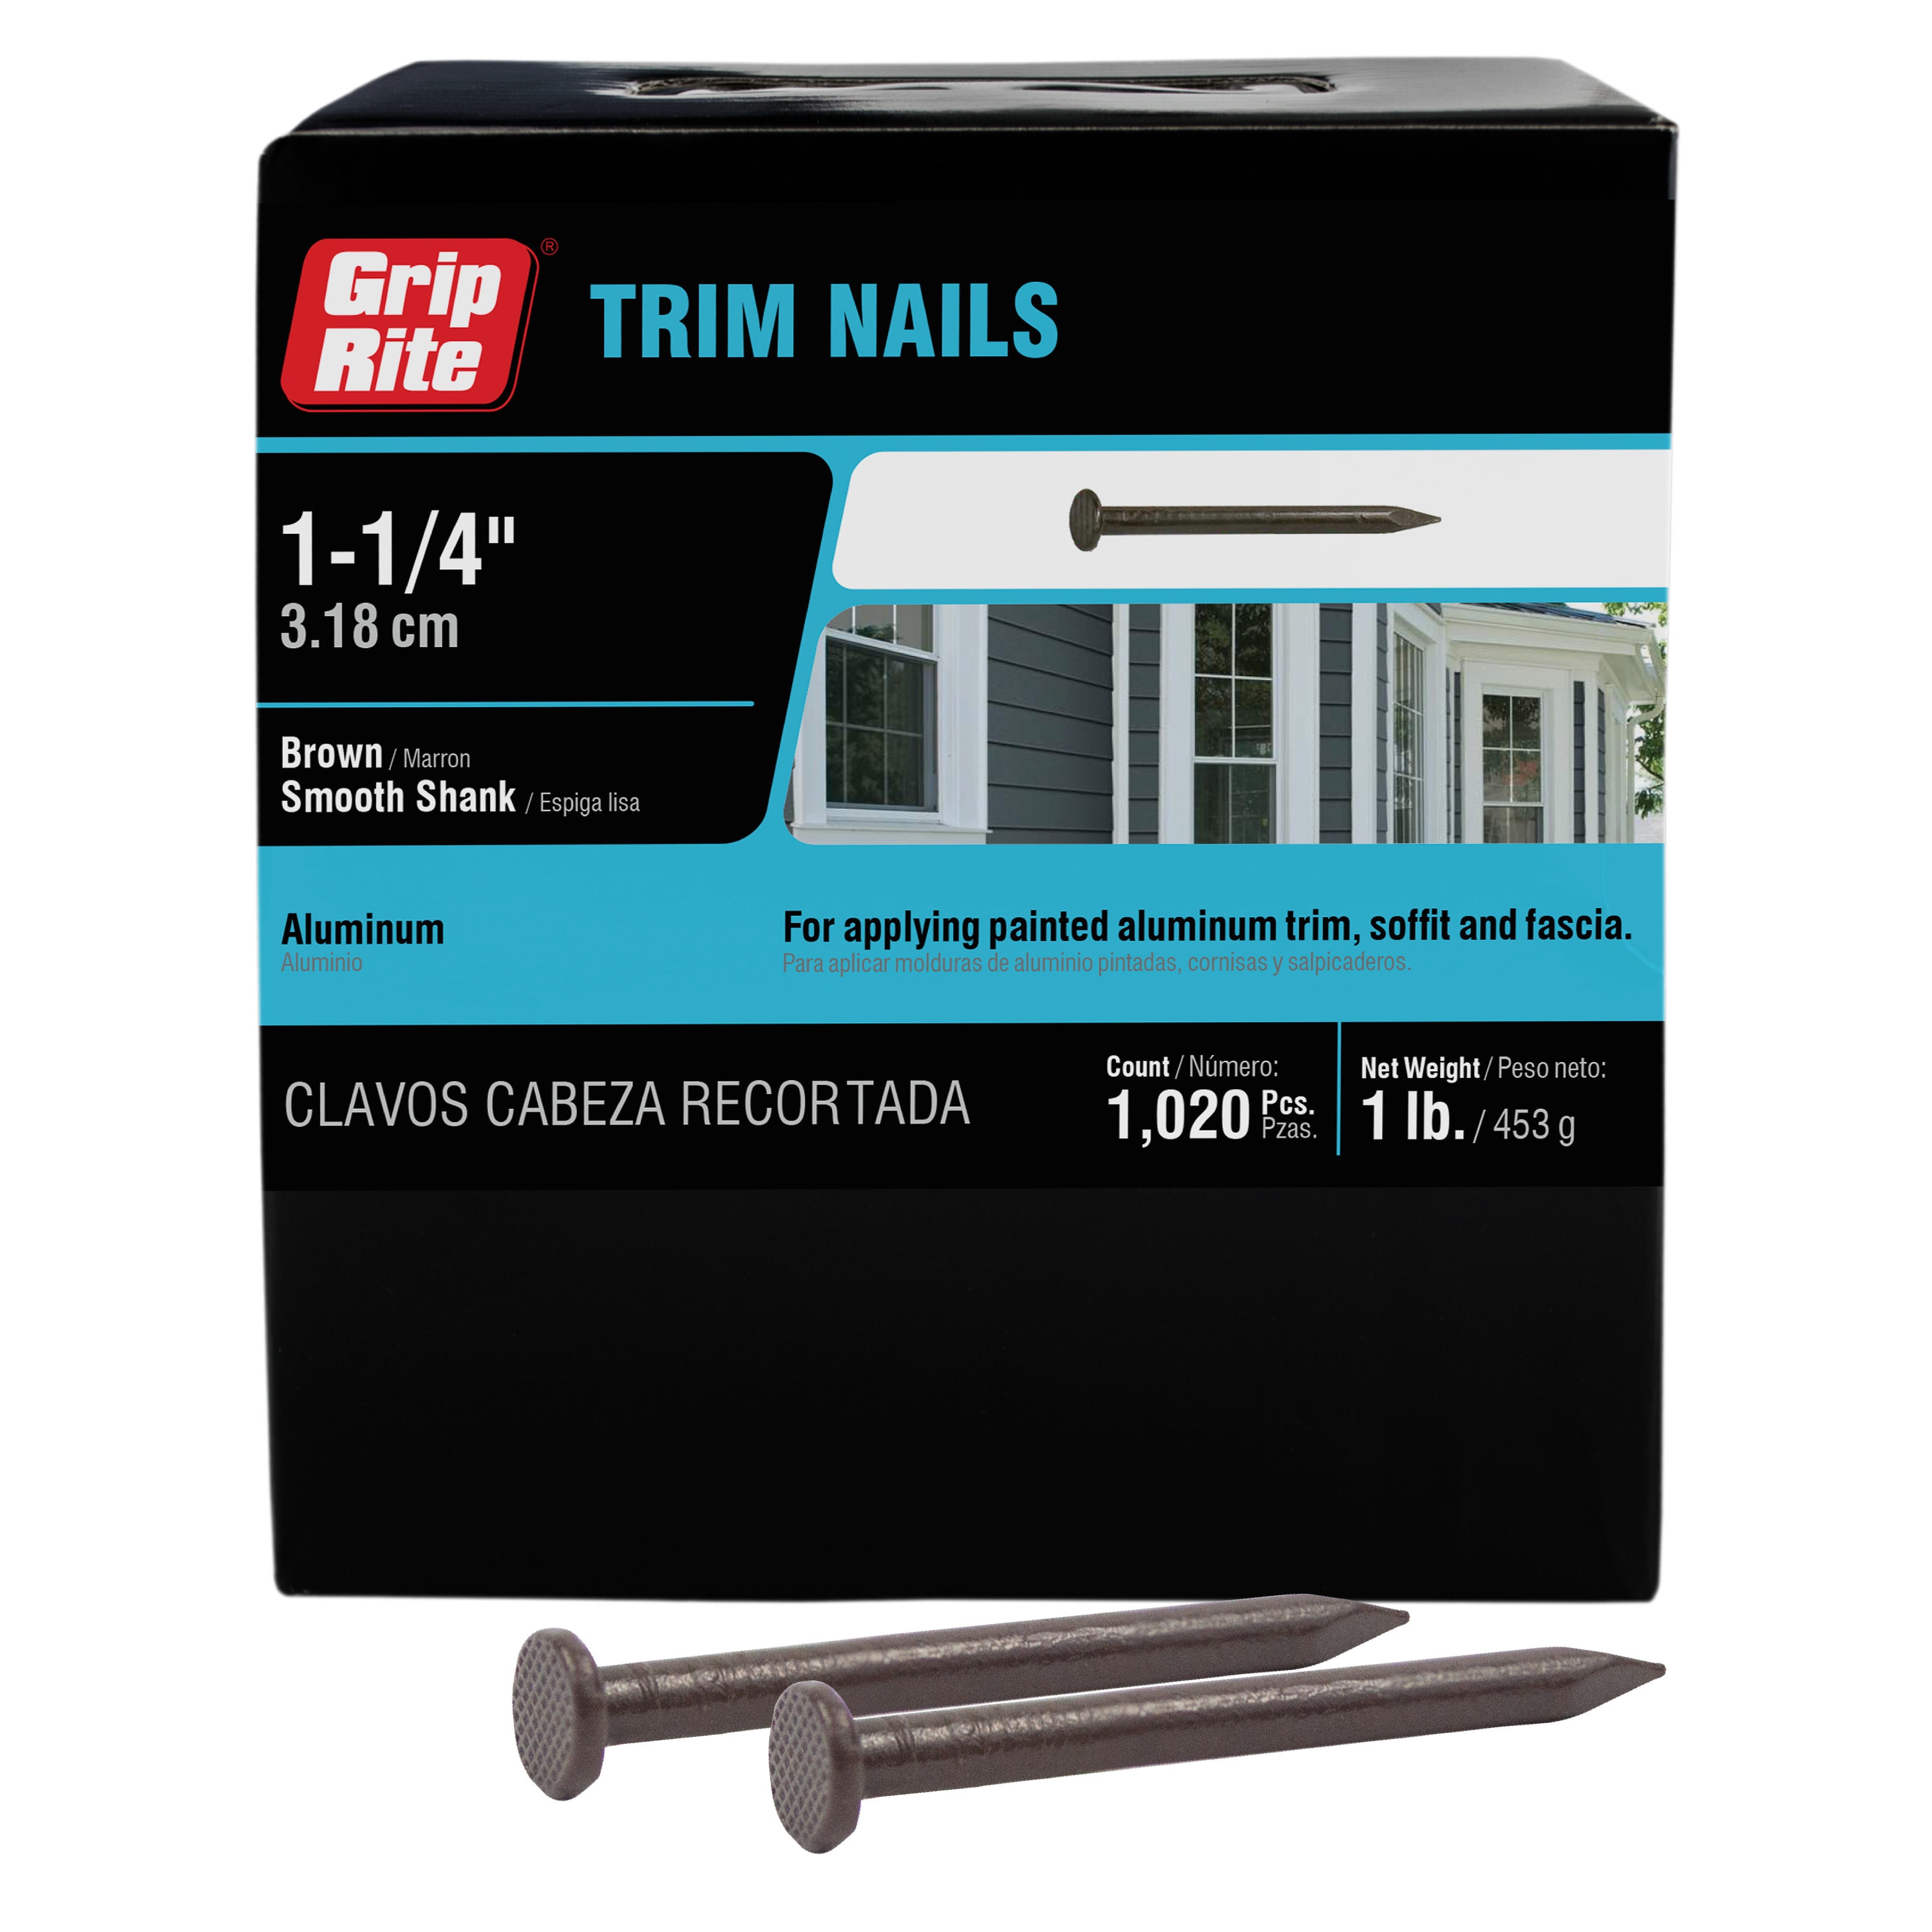 1 1/4" Trim Nails Stainless Steel BROWN Finish Nails 1lb box GRIP Rite 